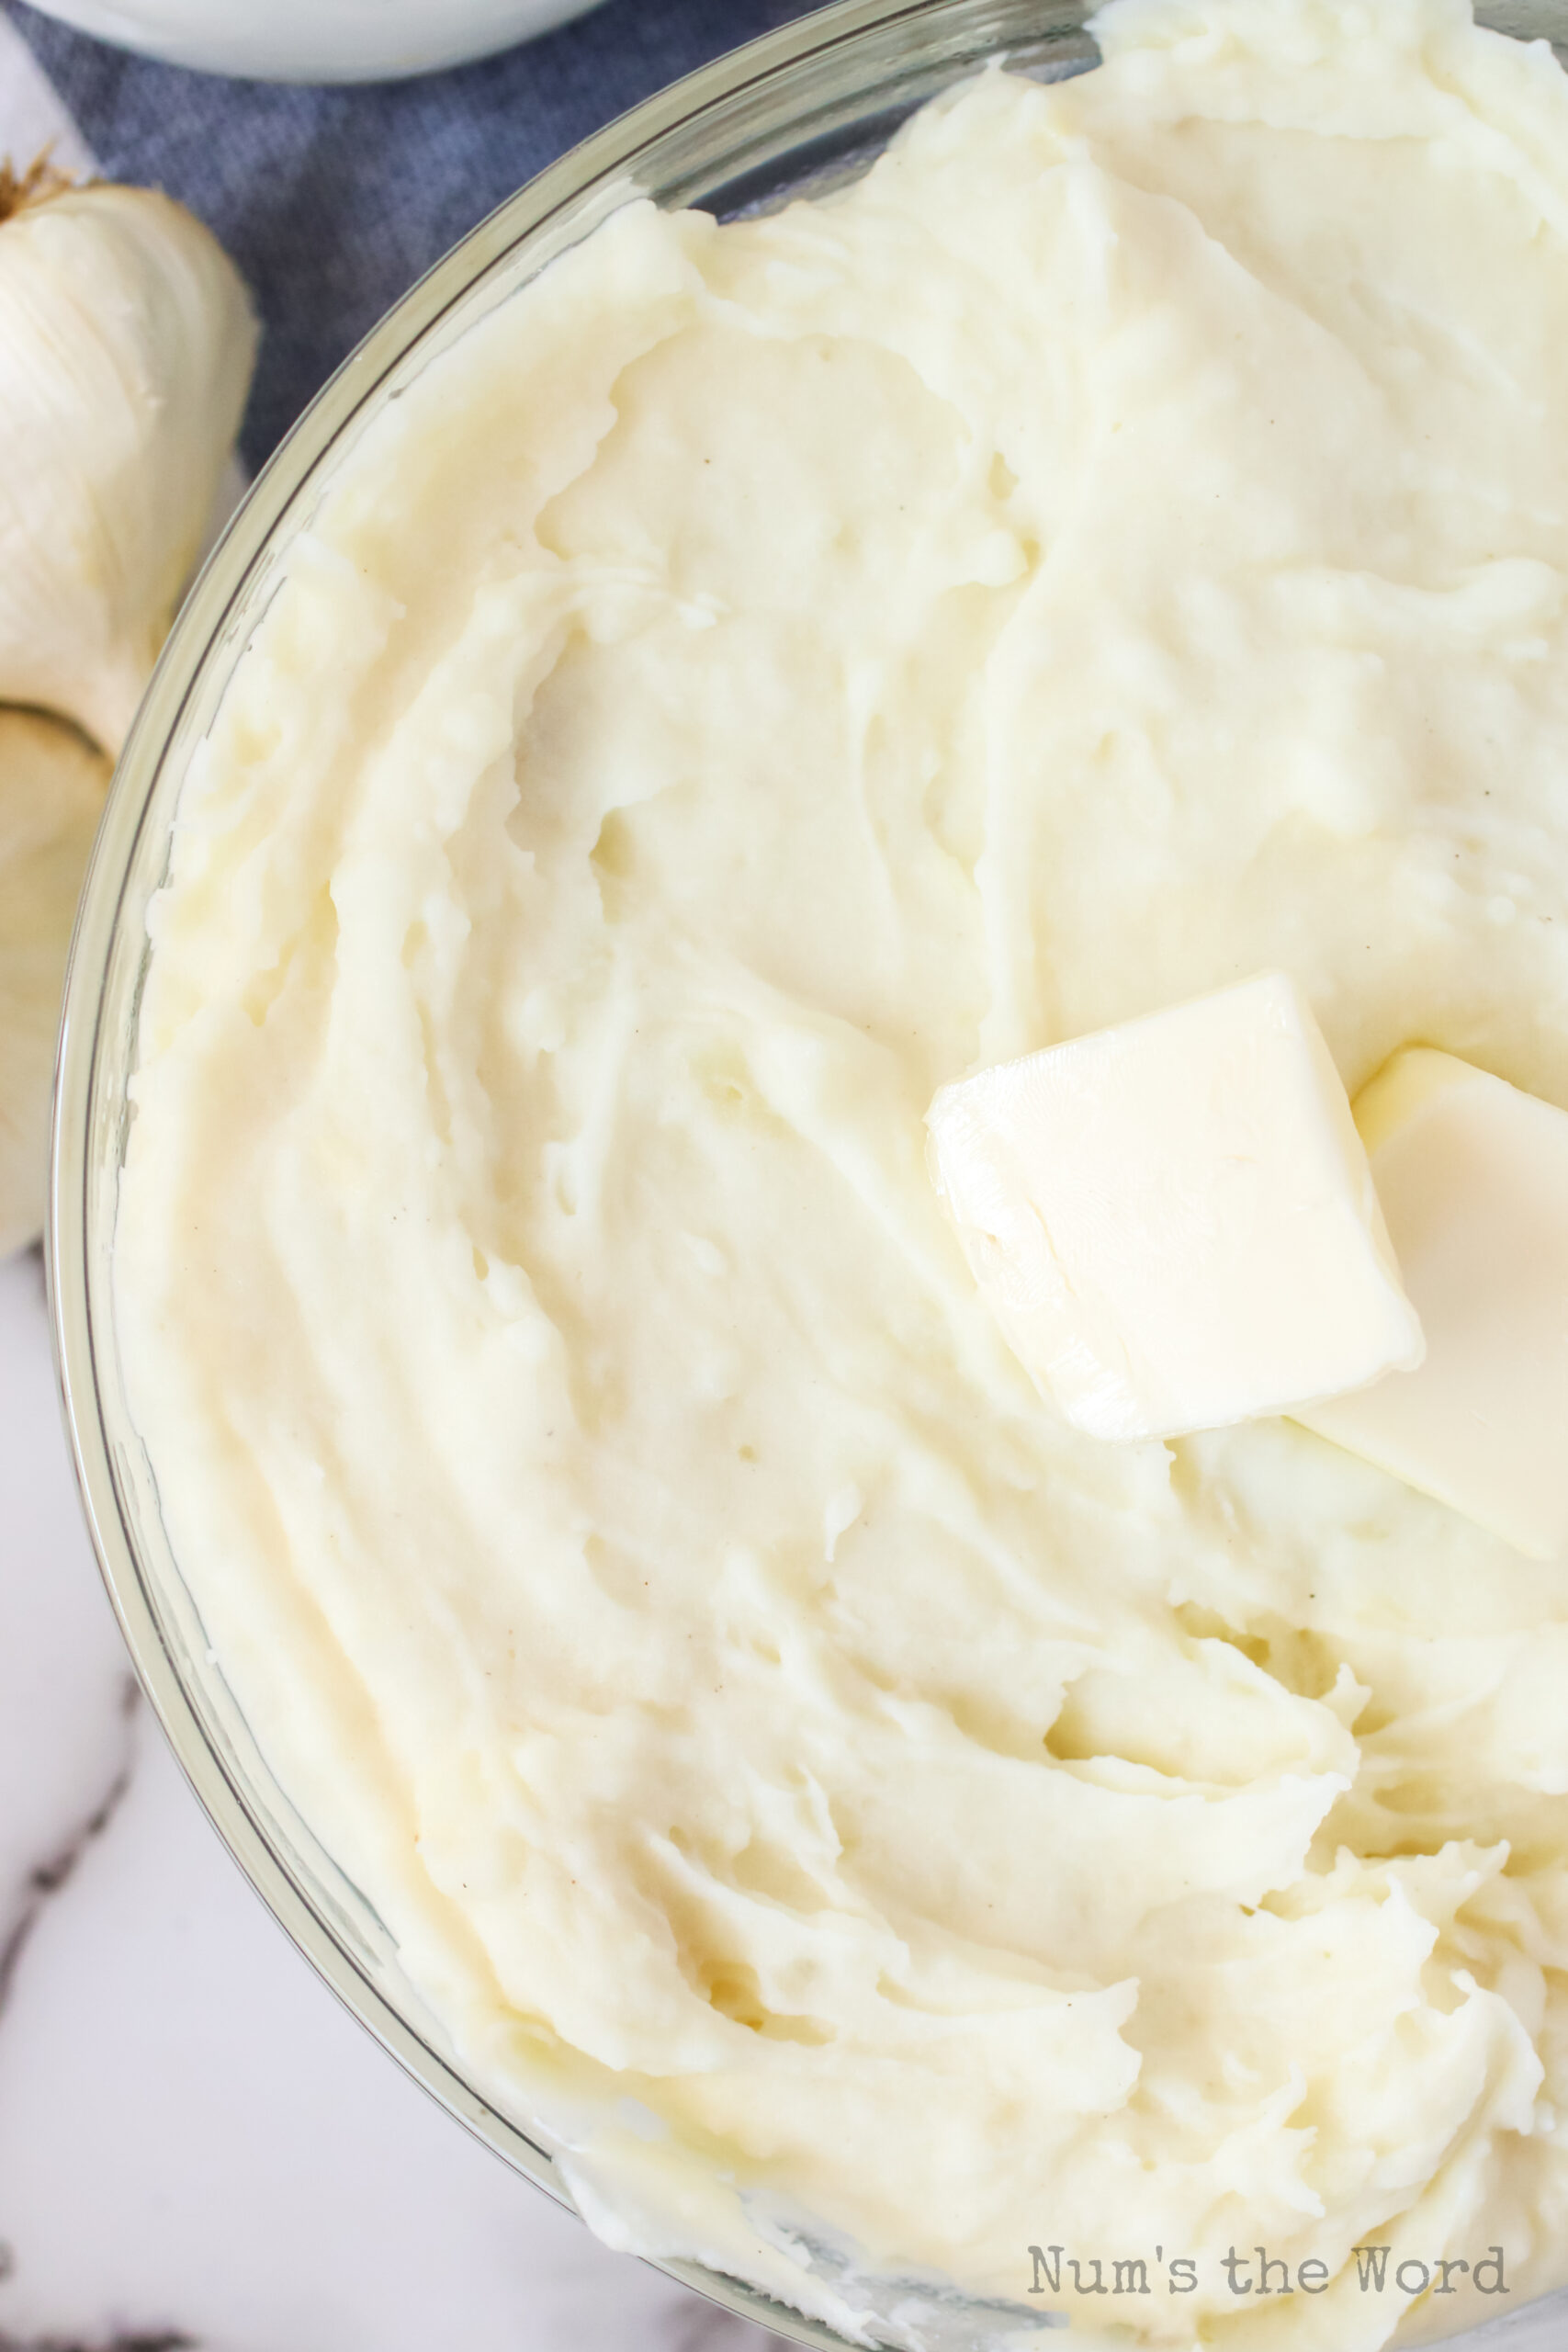 zoomed in image of mashed potatoes with a pat of butter on top